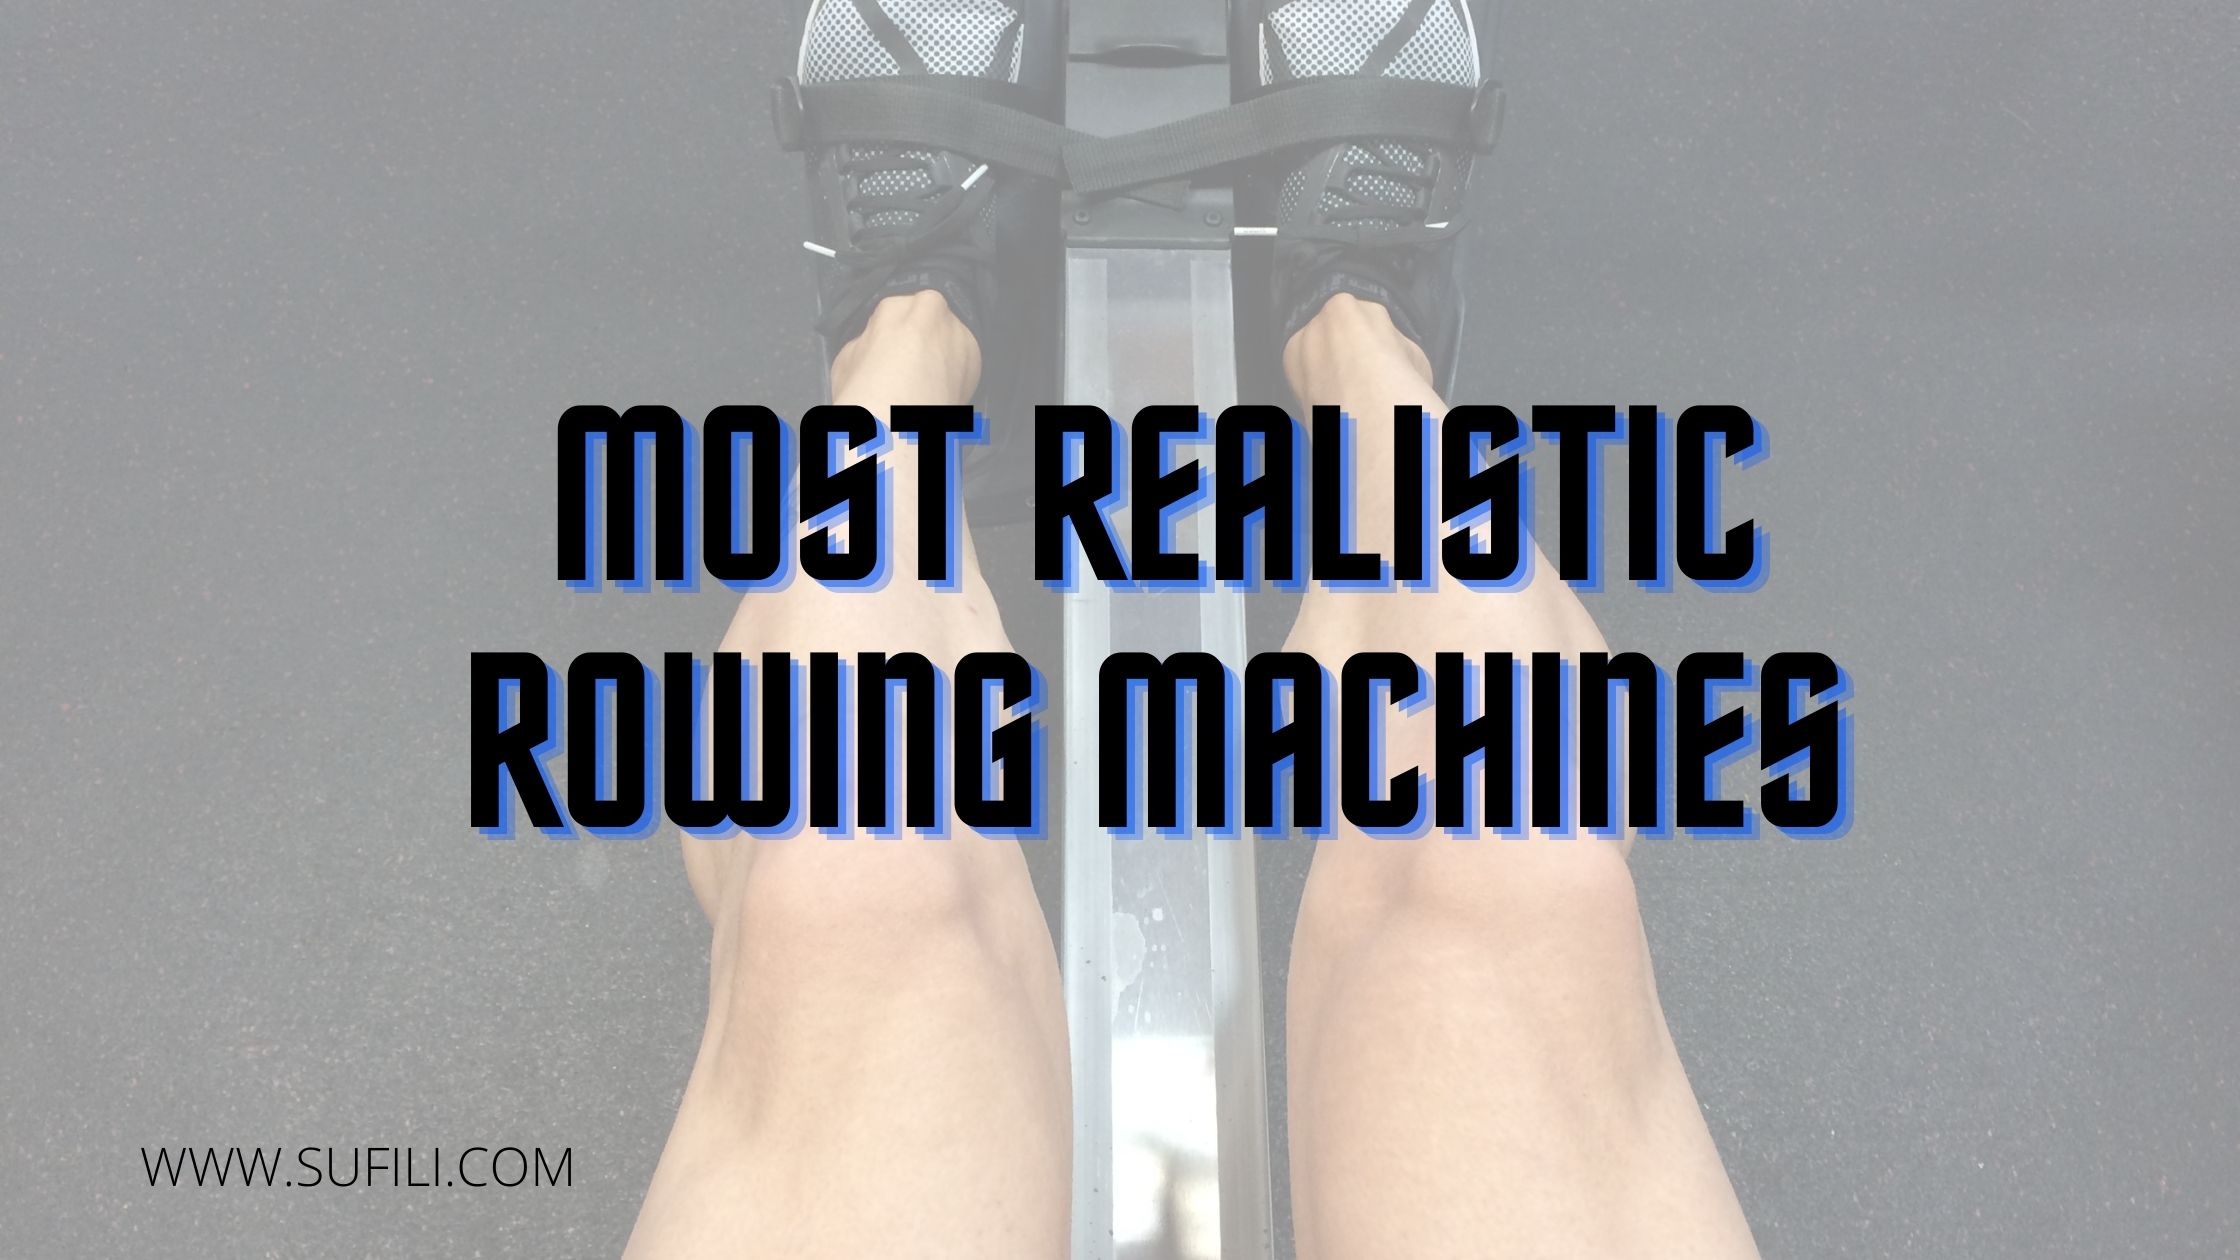 Most realistic rowing machine